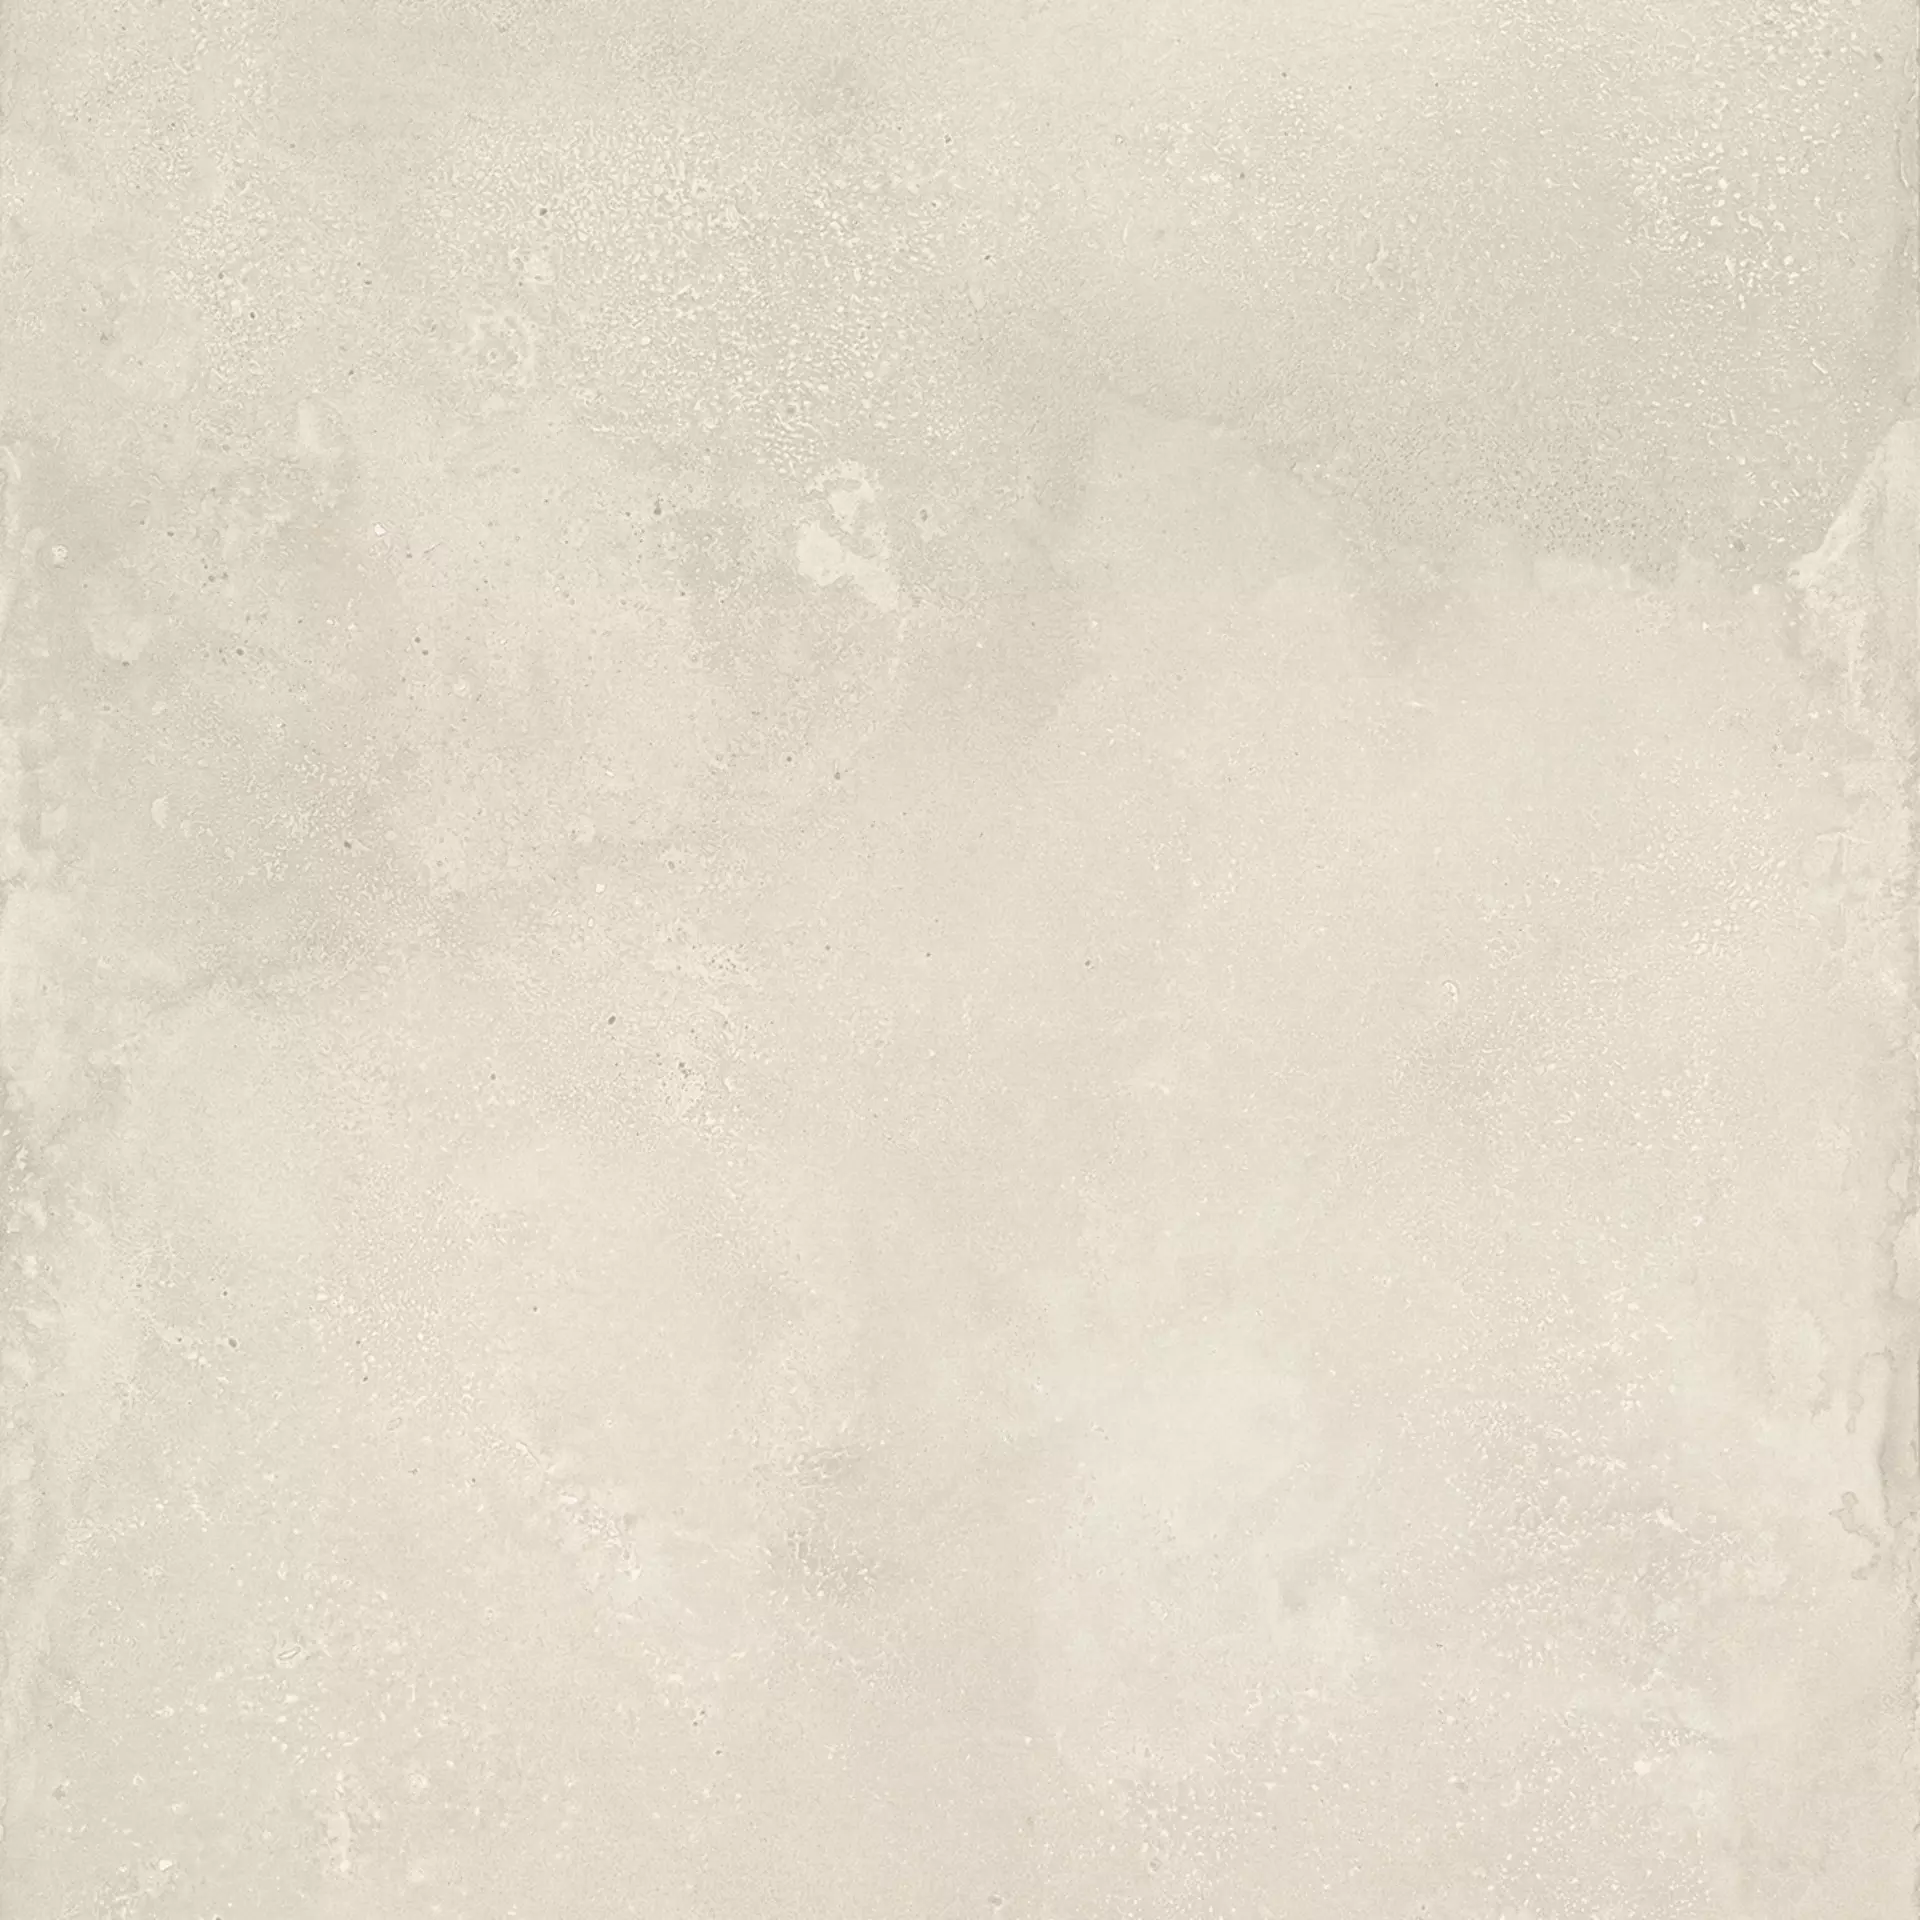 Fondovalle Pigmento Gesso Natural PGM202 80x80cm rectified 8,5mm